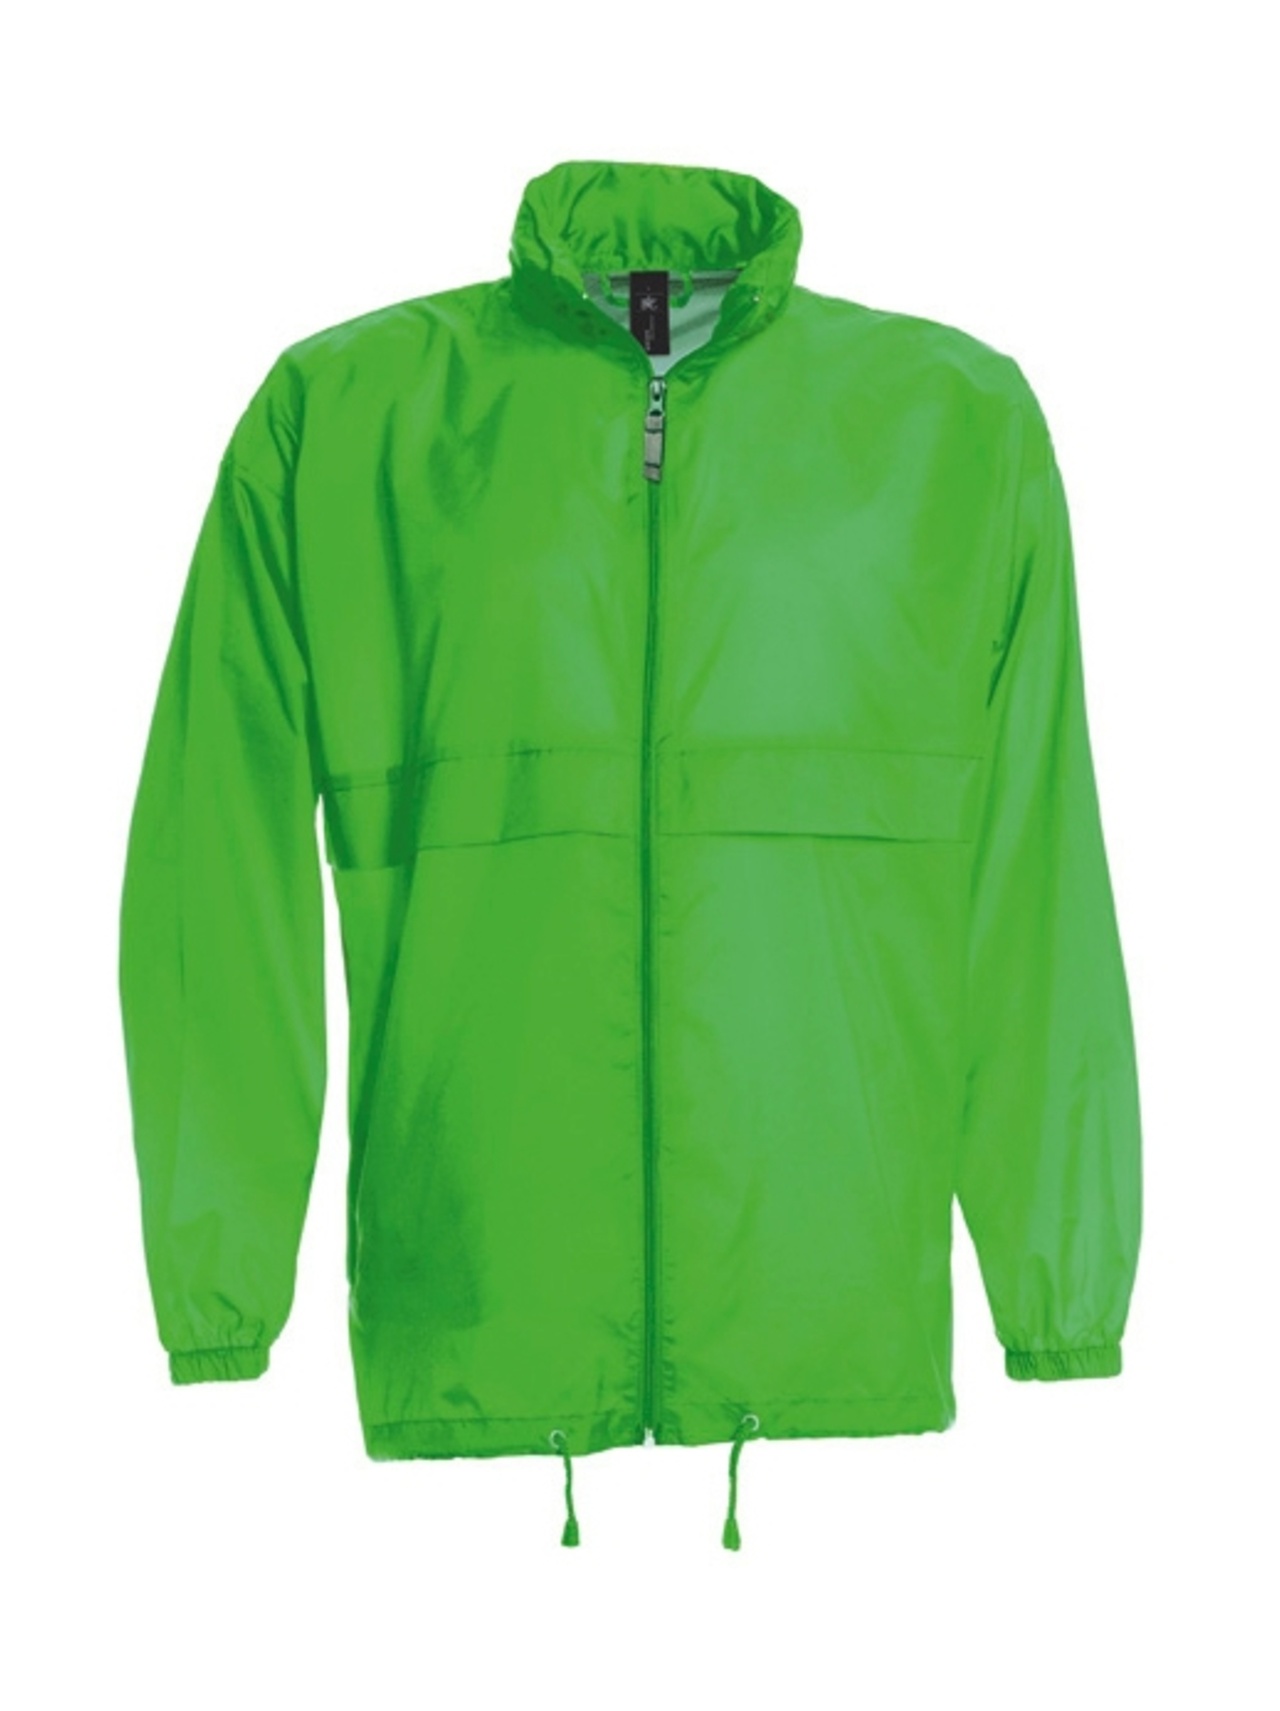 B and C Collection Sirocco - REAL GREEN - L